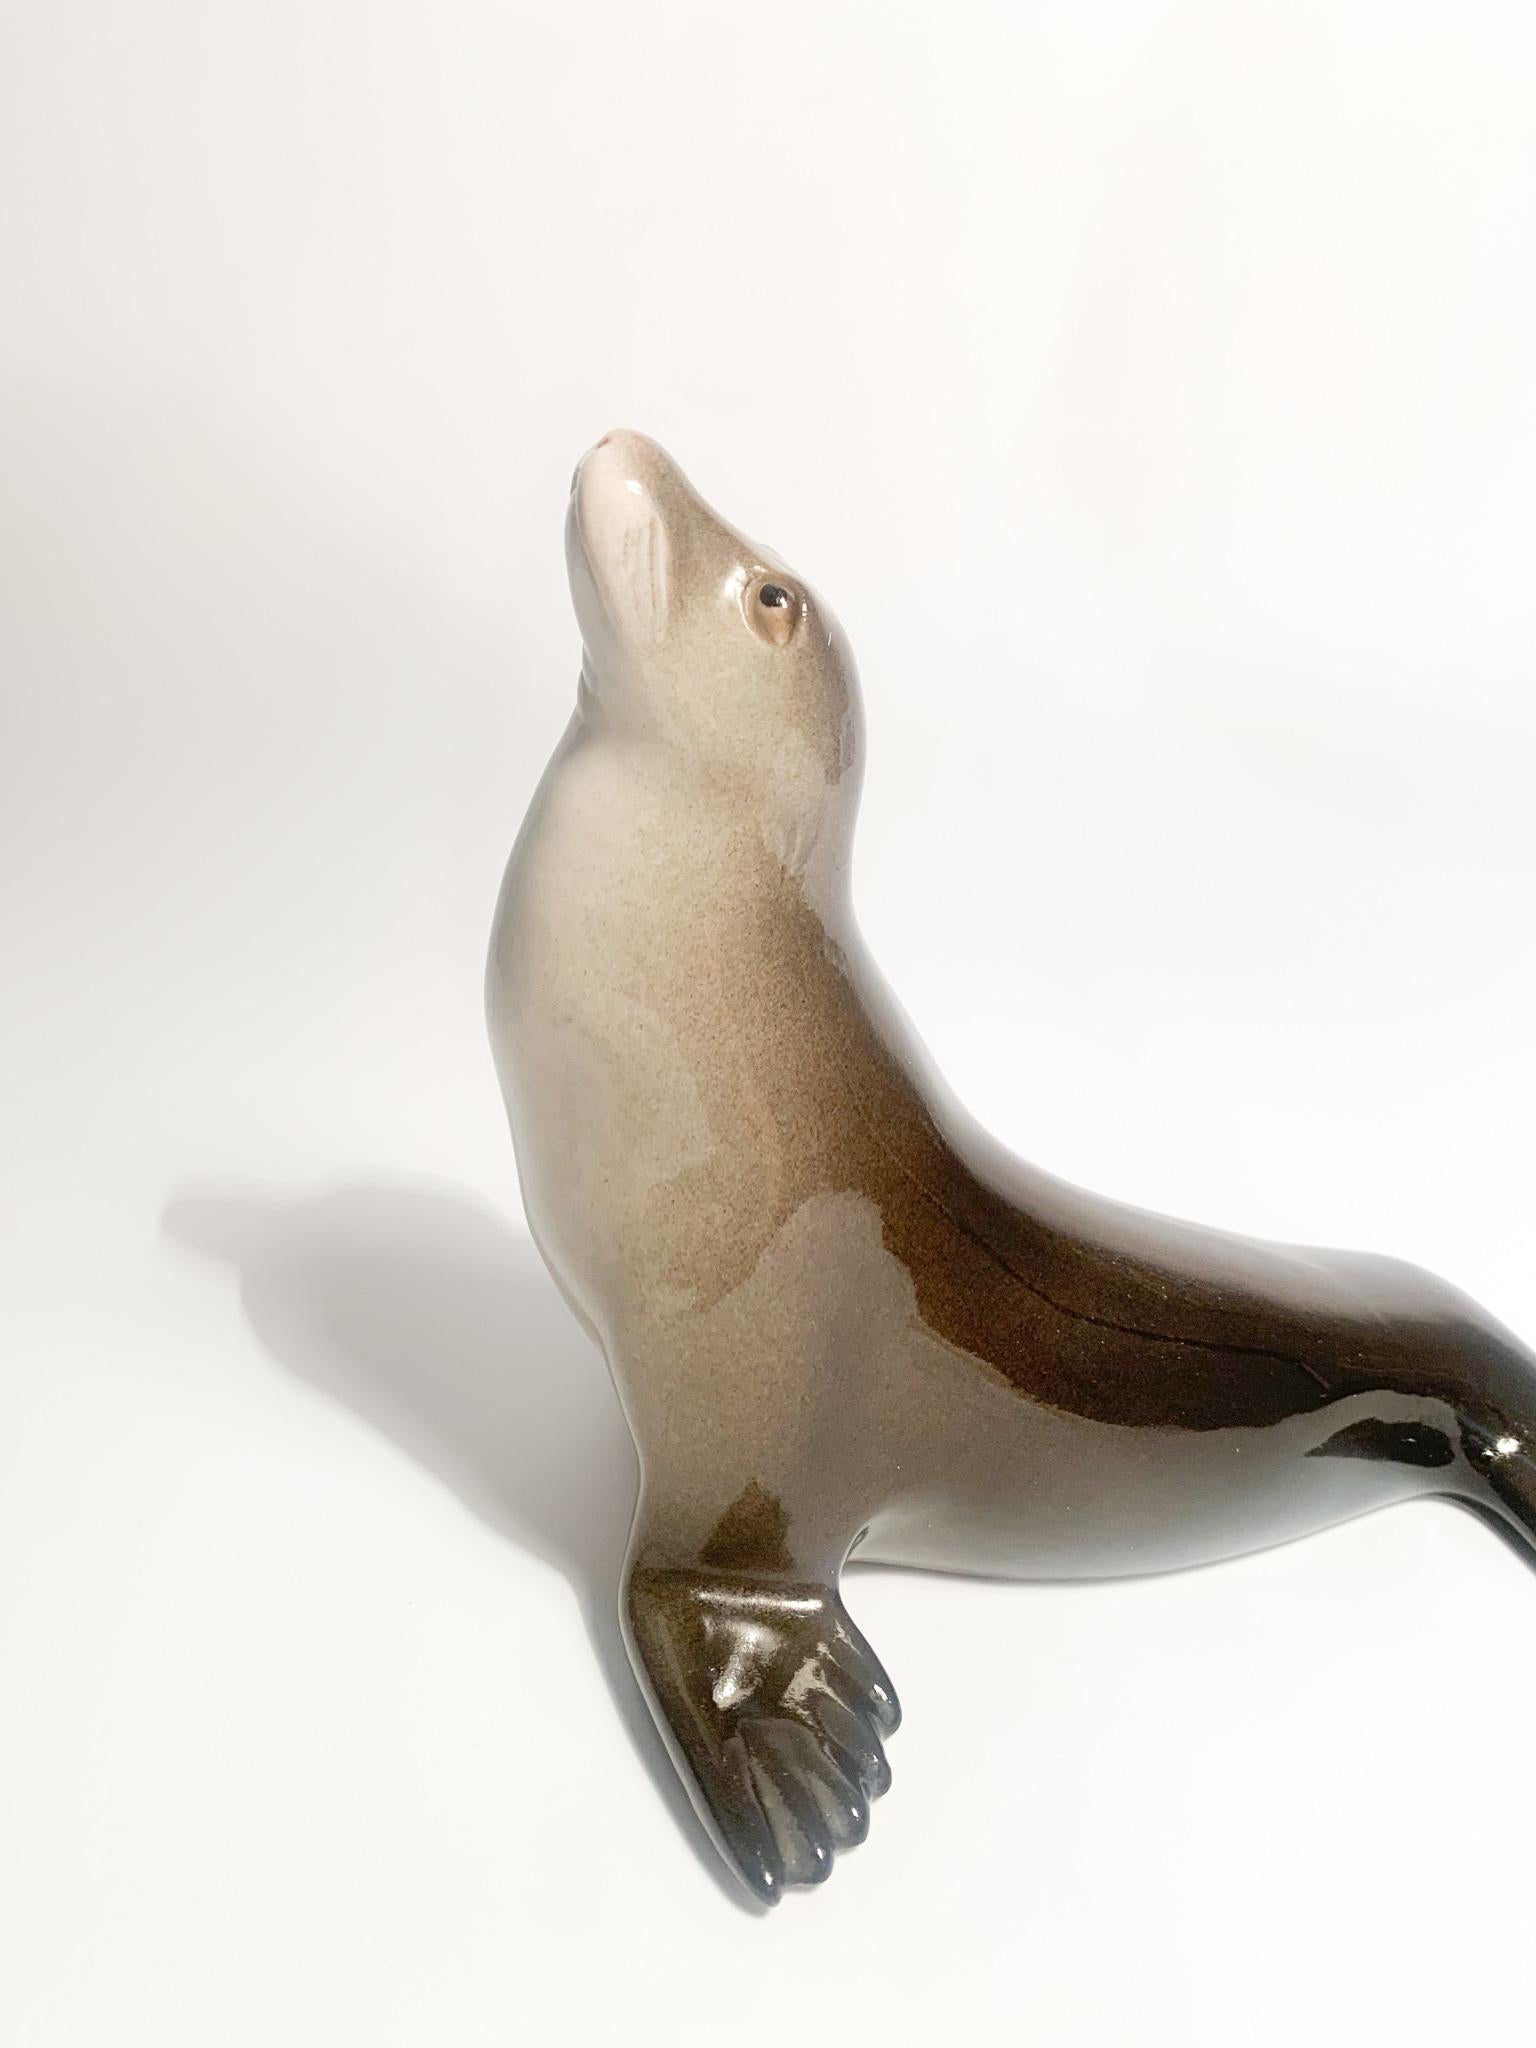 URSS Ceramic Sculpture of a Seal from the 1940s For Sale 1